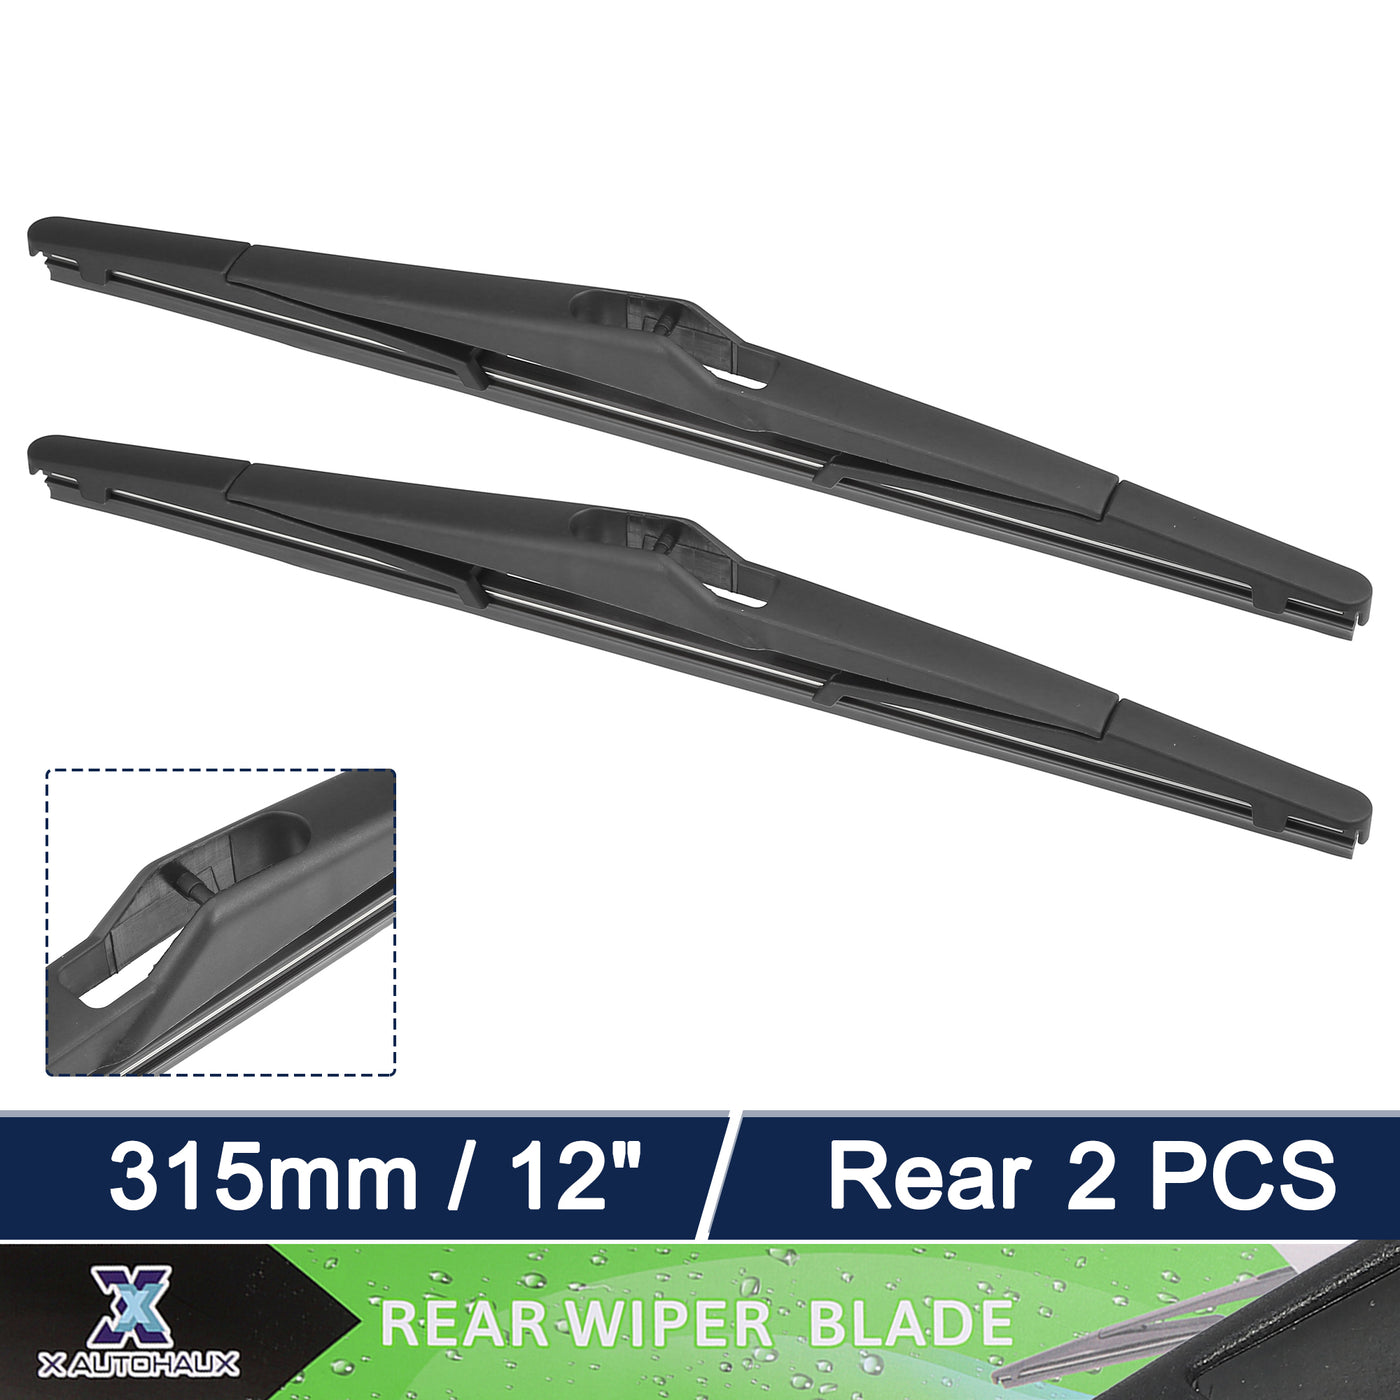 X AUTOHAUX 2pcs Rear Windshield Wiper Blade Replacement for Ford Fiesta MK6 2008-2016 for Peugeot 308 SW II 2014-2020 for Saab 9-3 Estate 2005-2012